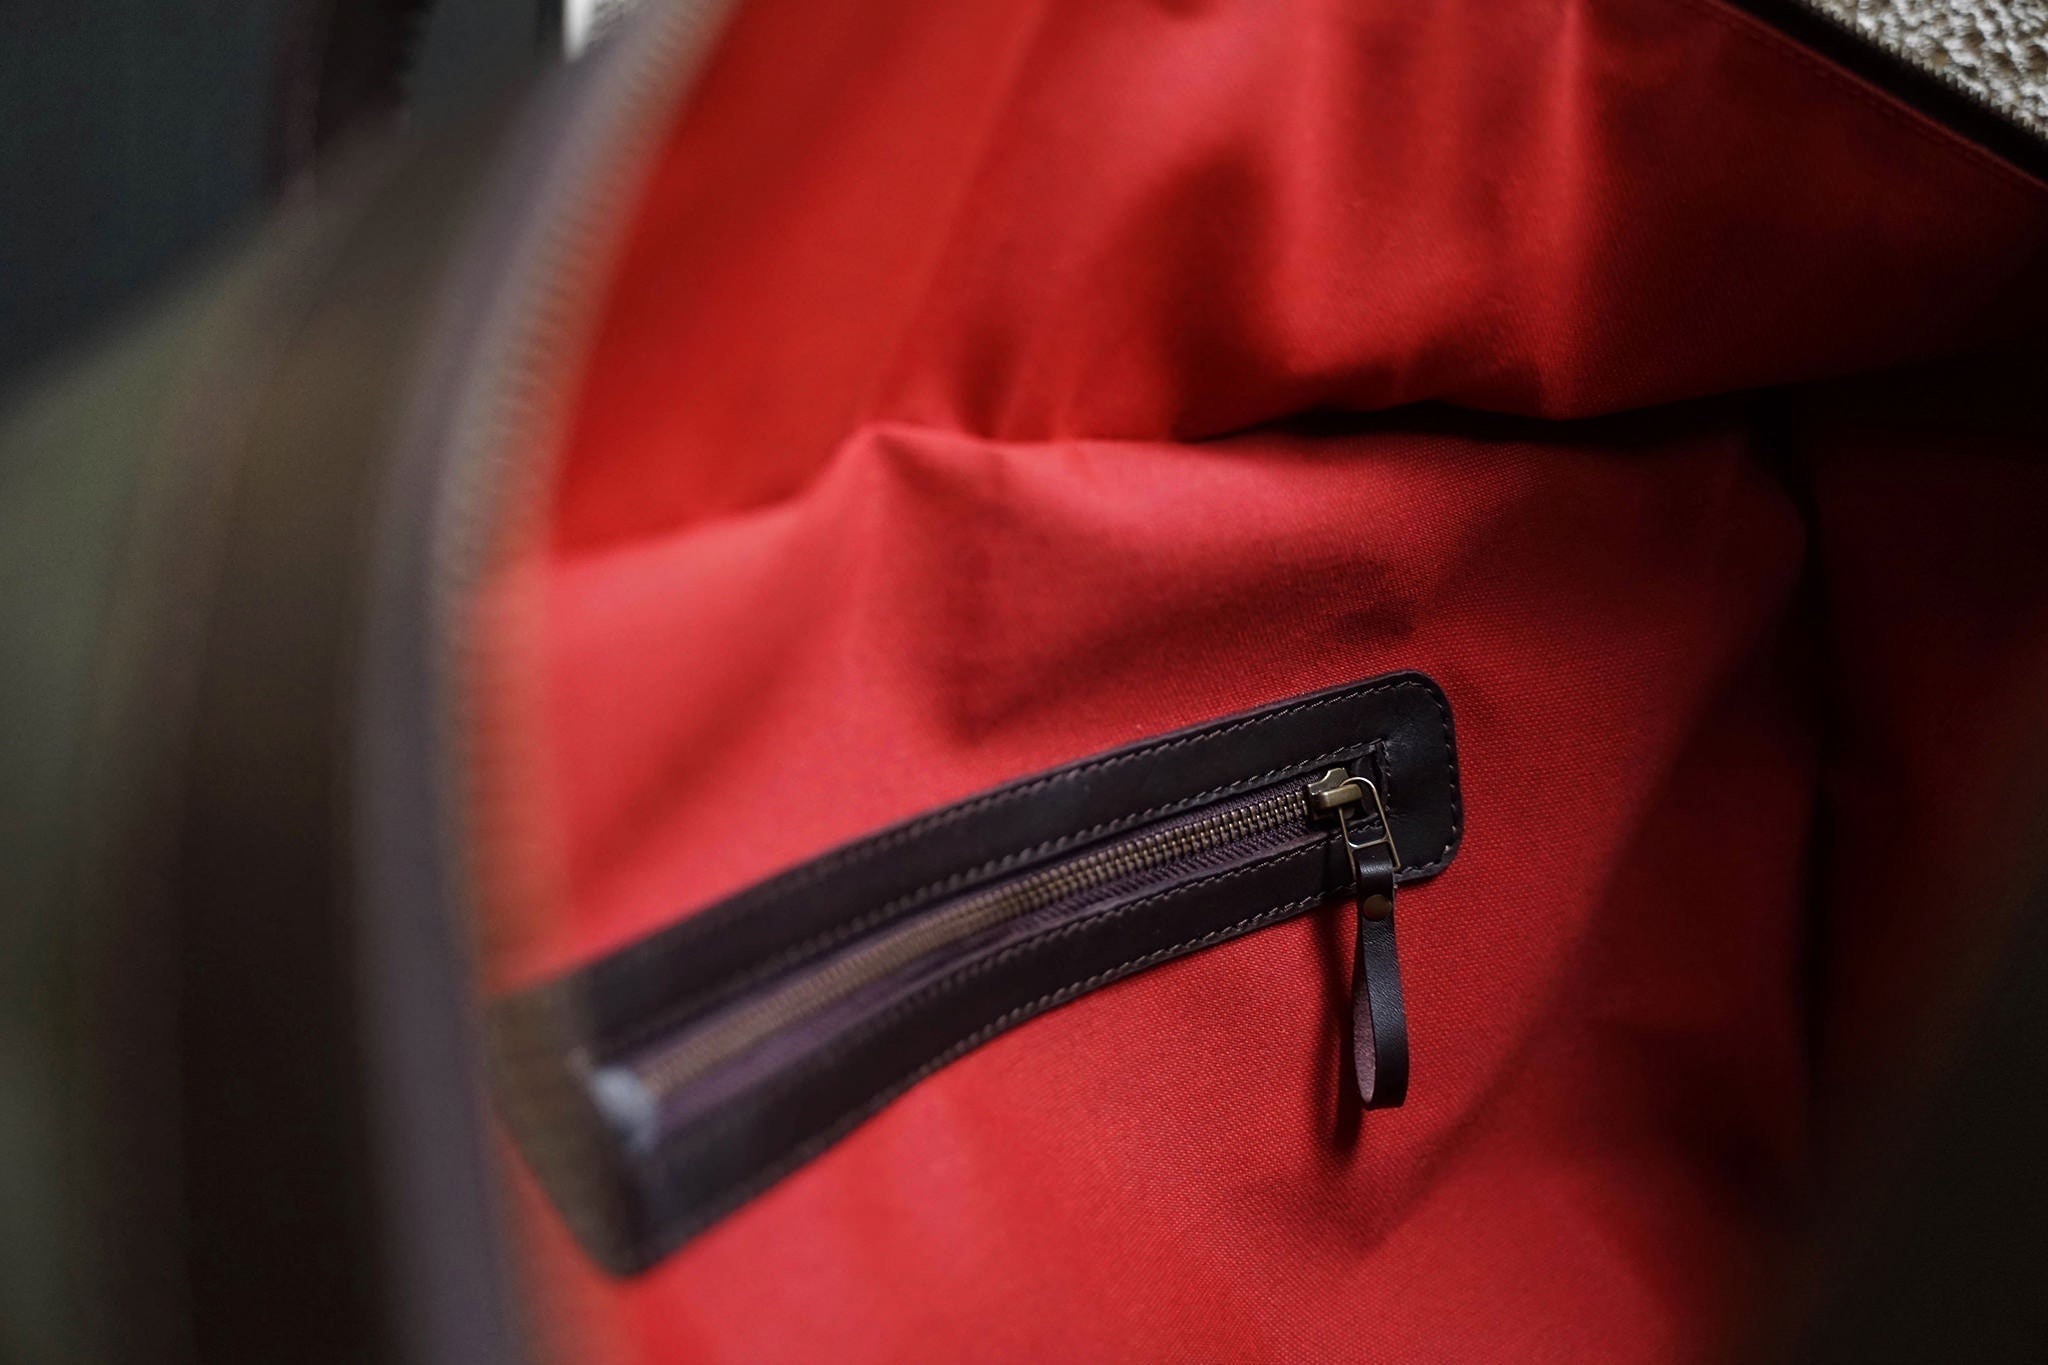 One zippered pocket inside. This shot is from the C.O. Travel/Olive